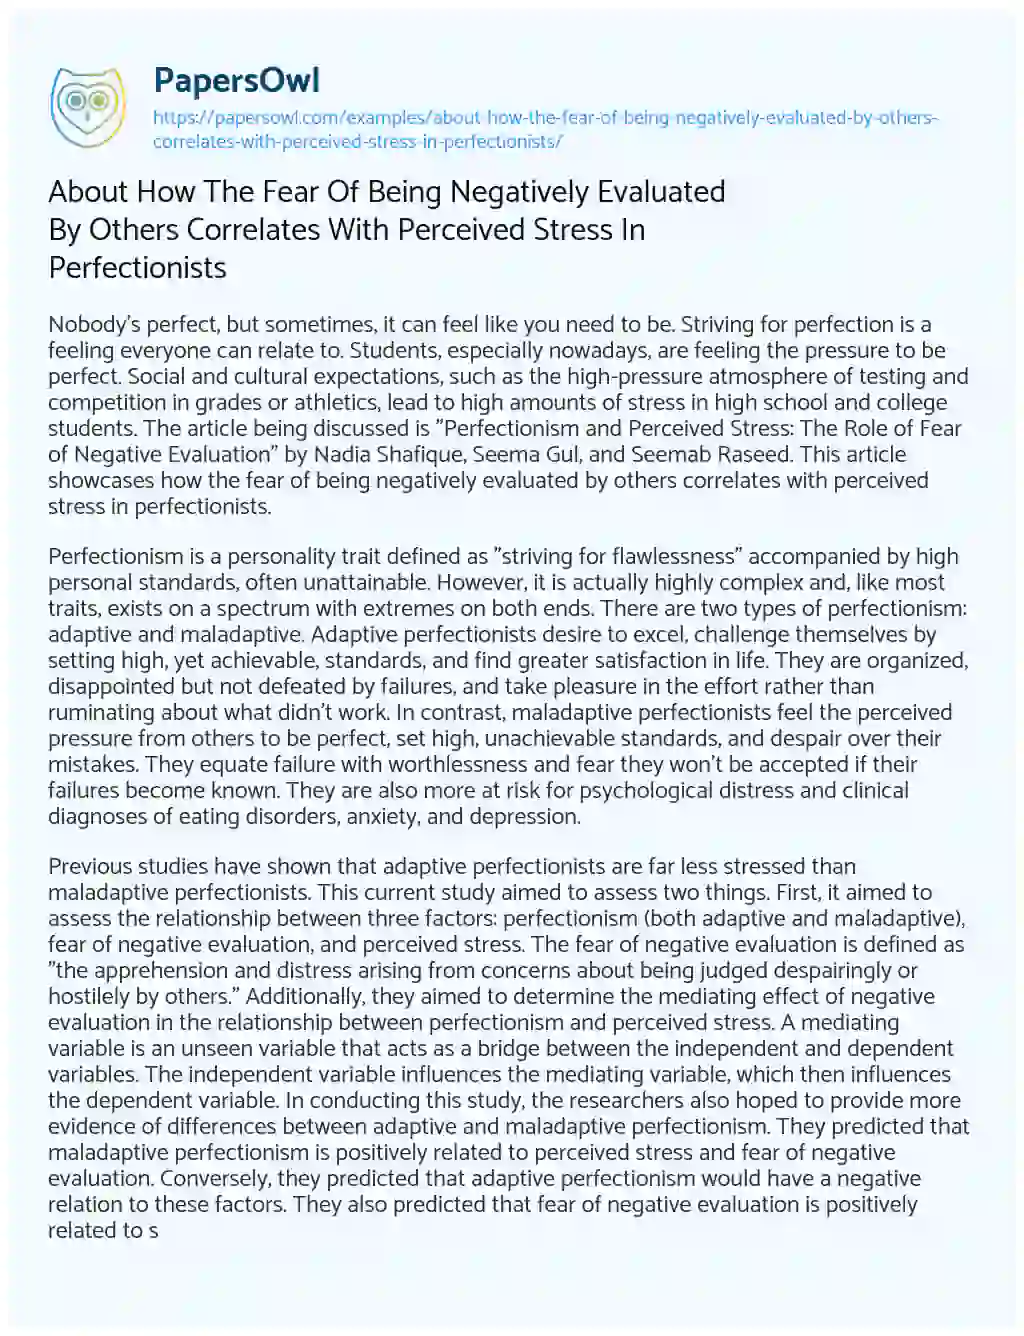 Essay on About how the Fear of being Negatively Evaluated by Others Correlates with Perceived Stress in Perfectionists